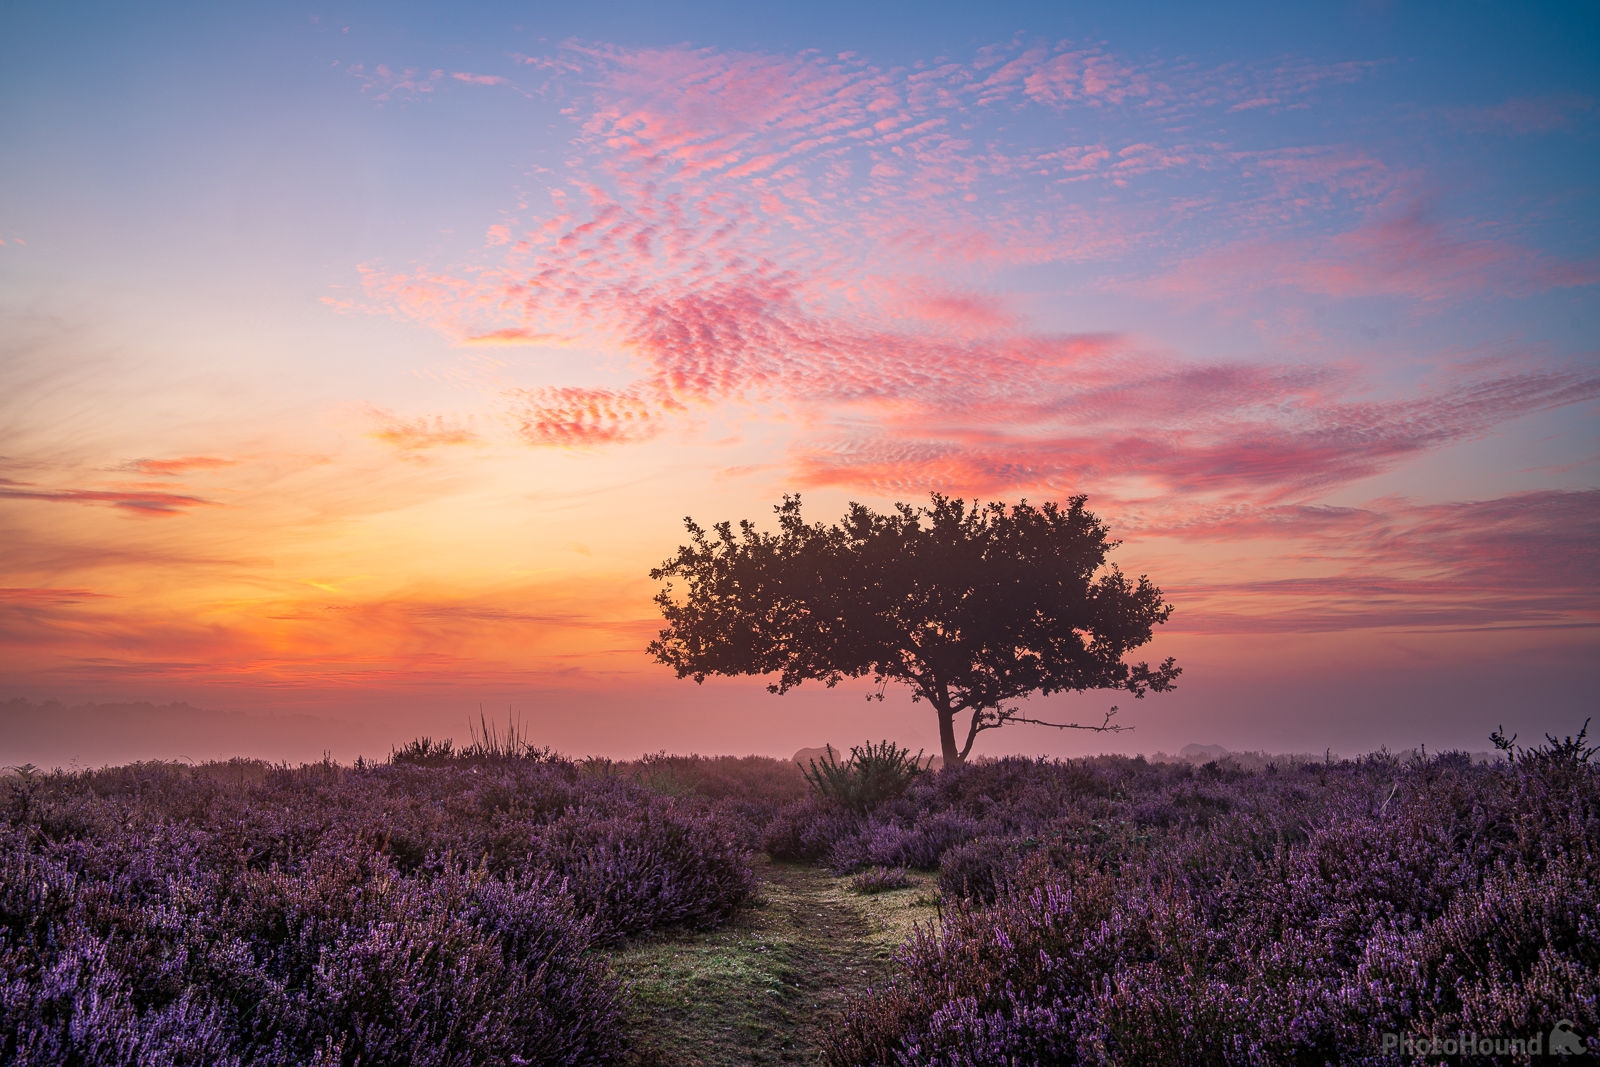 Image of Roydon Common by James Billings.